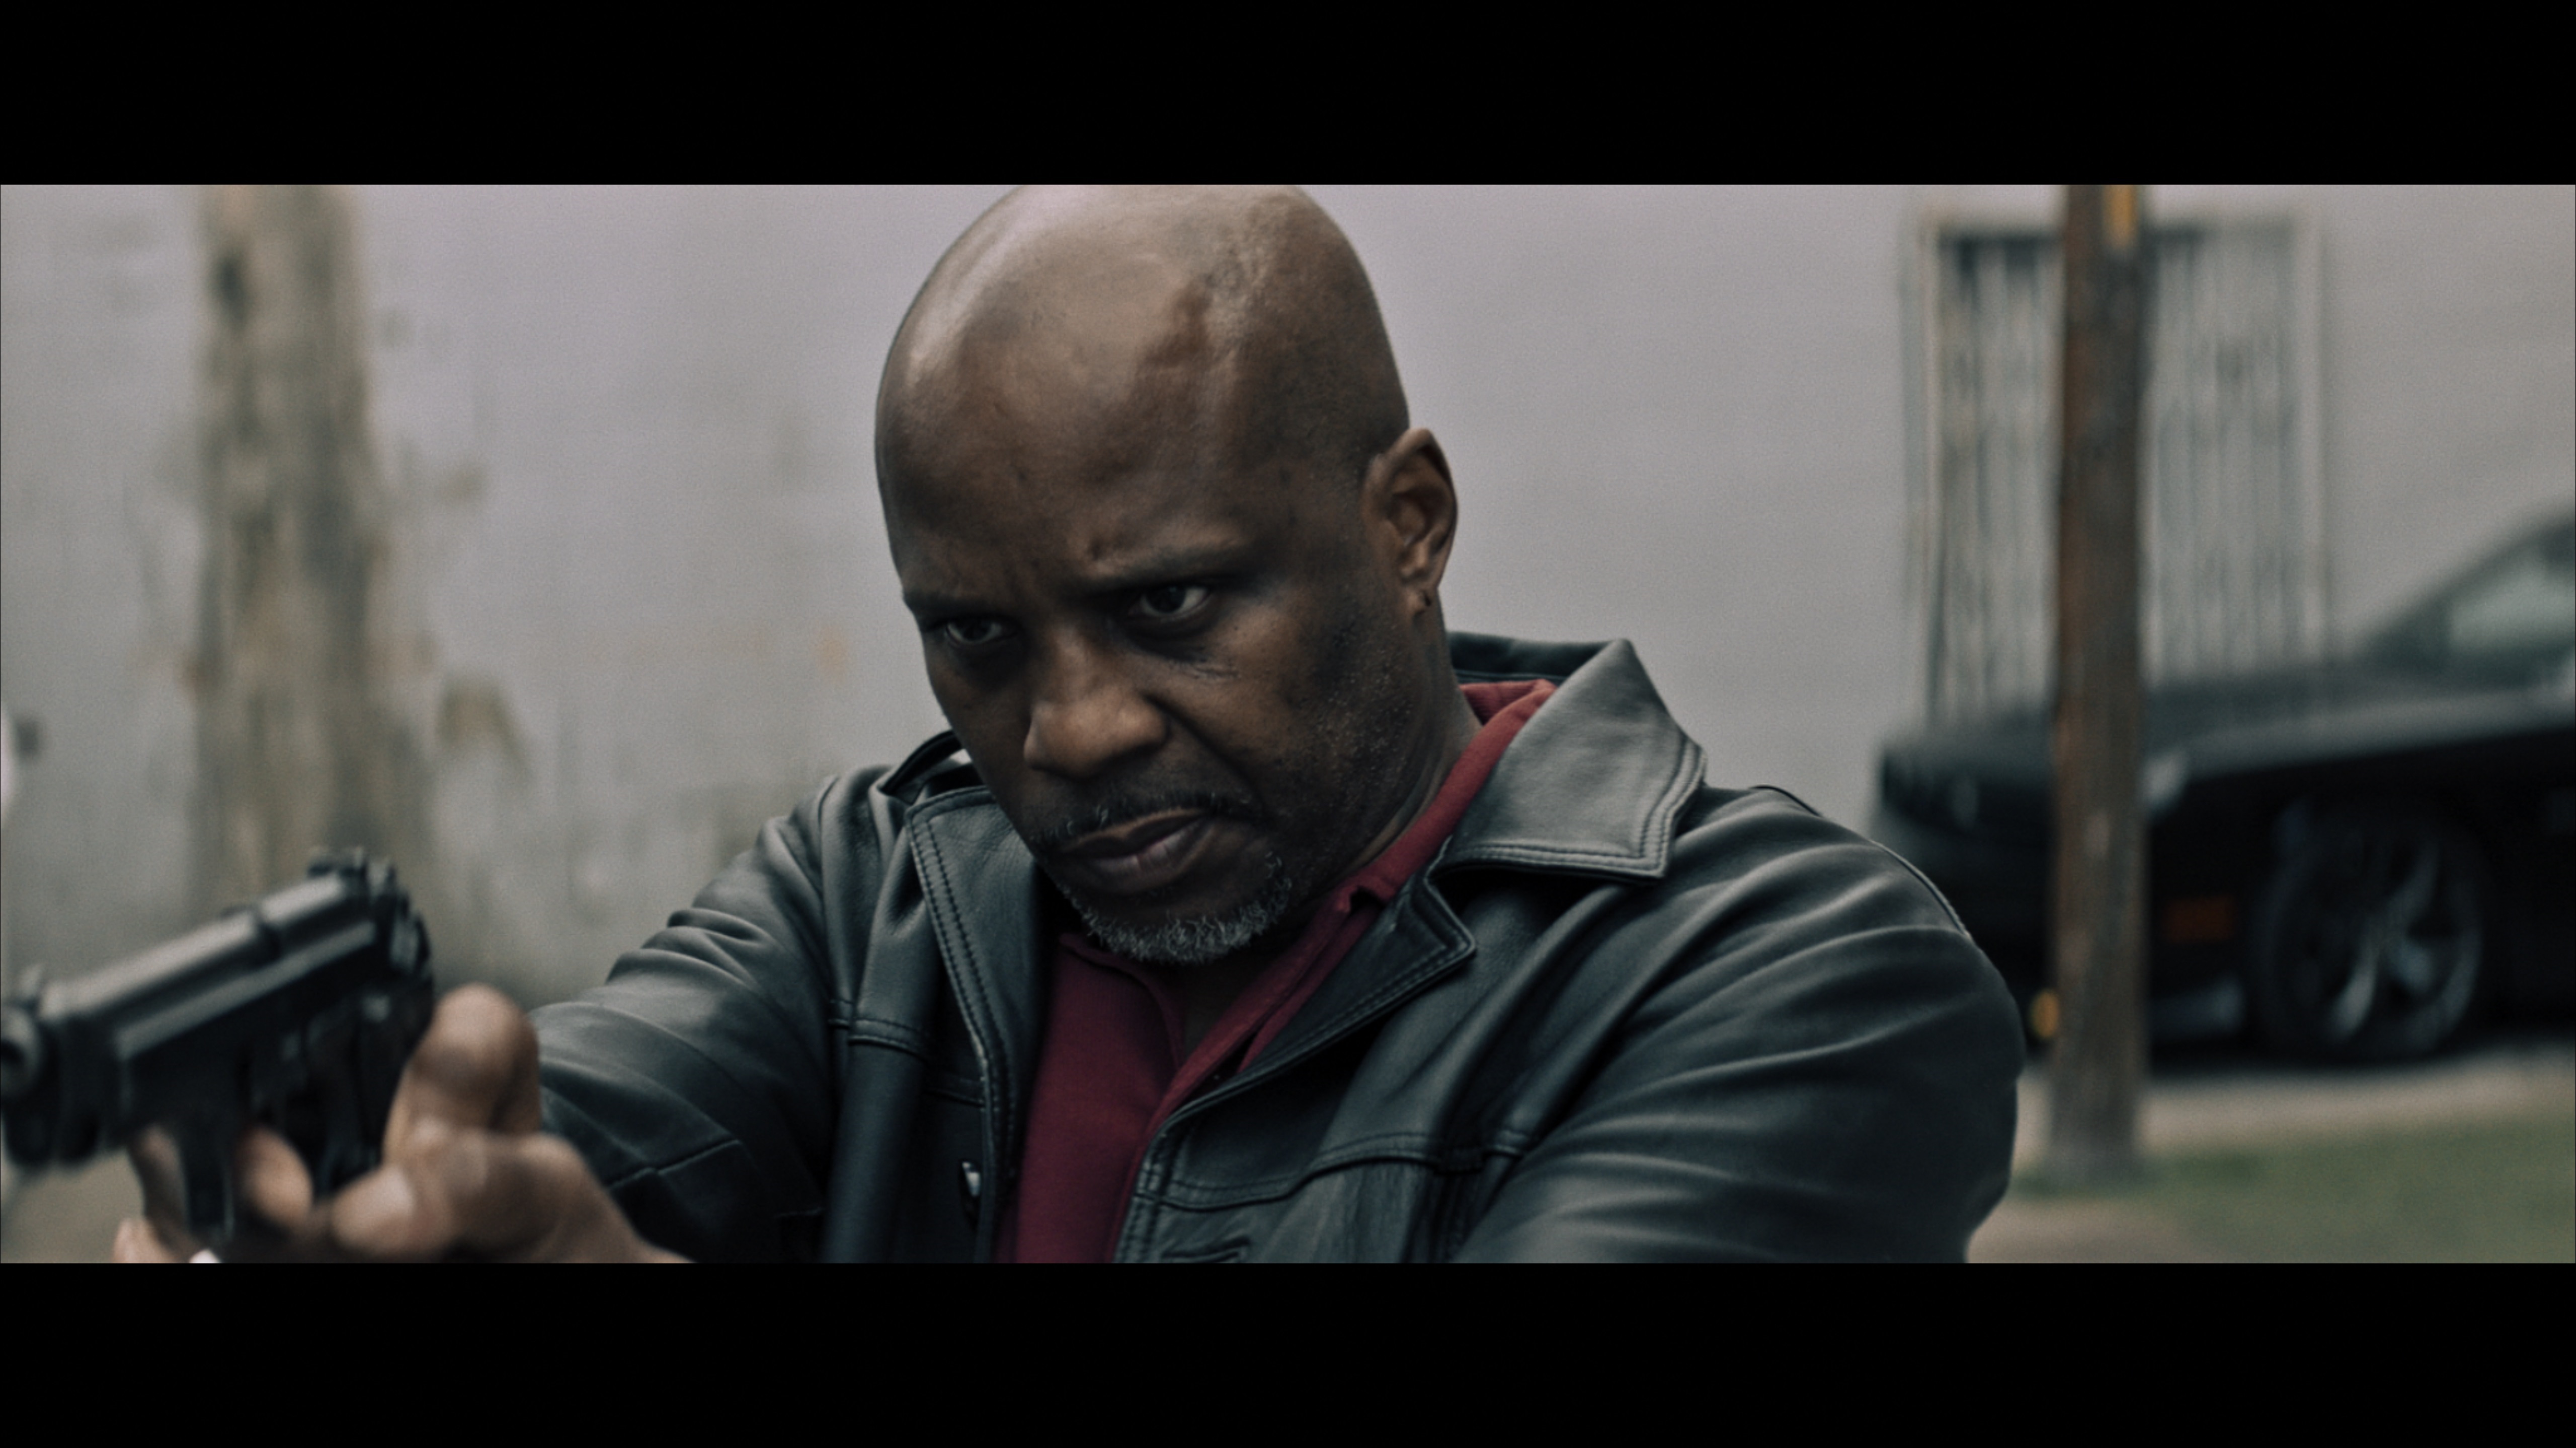 DMX stars in Beyond The Law with Steven Seagal